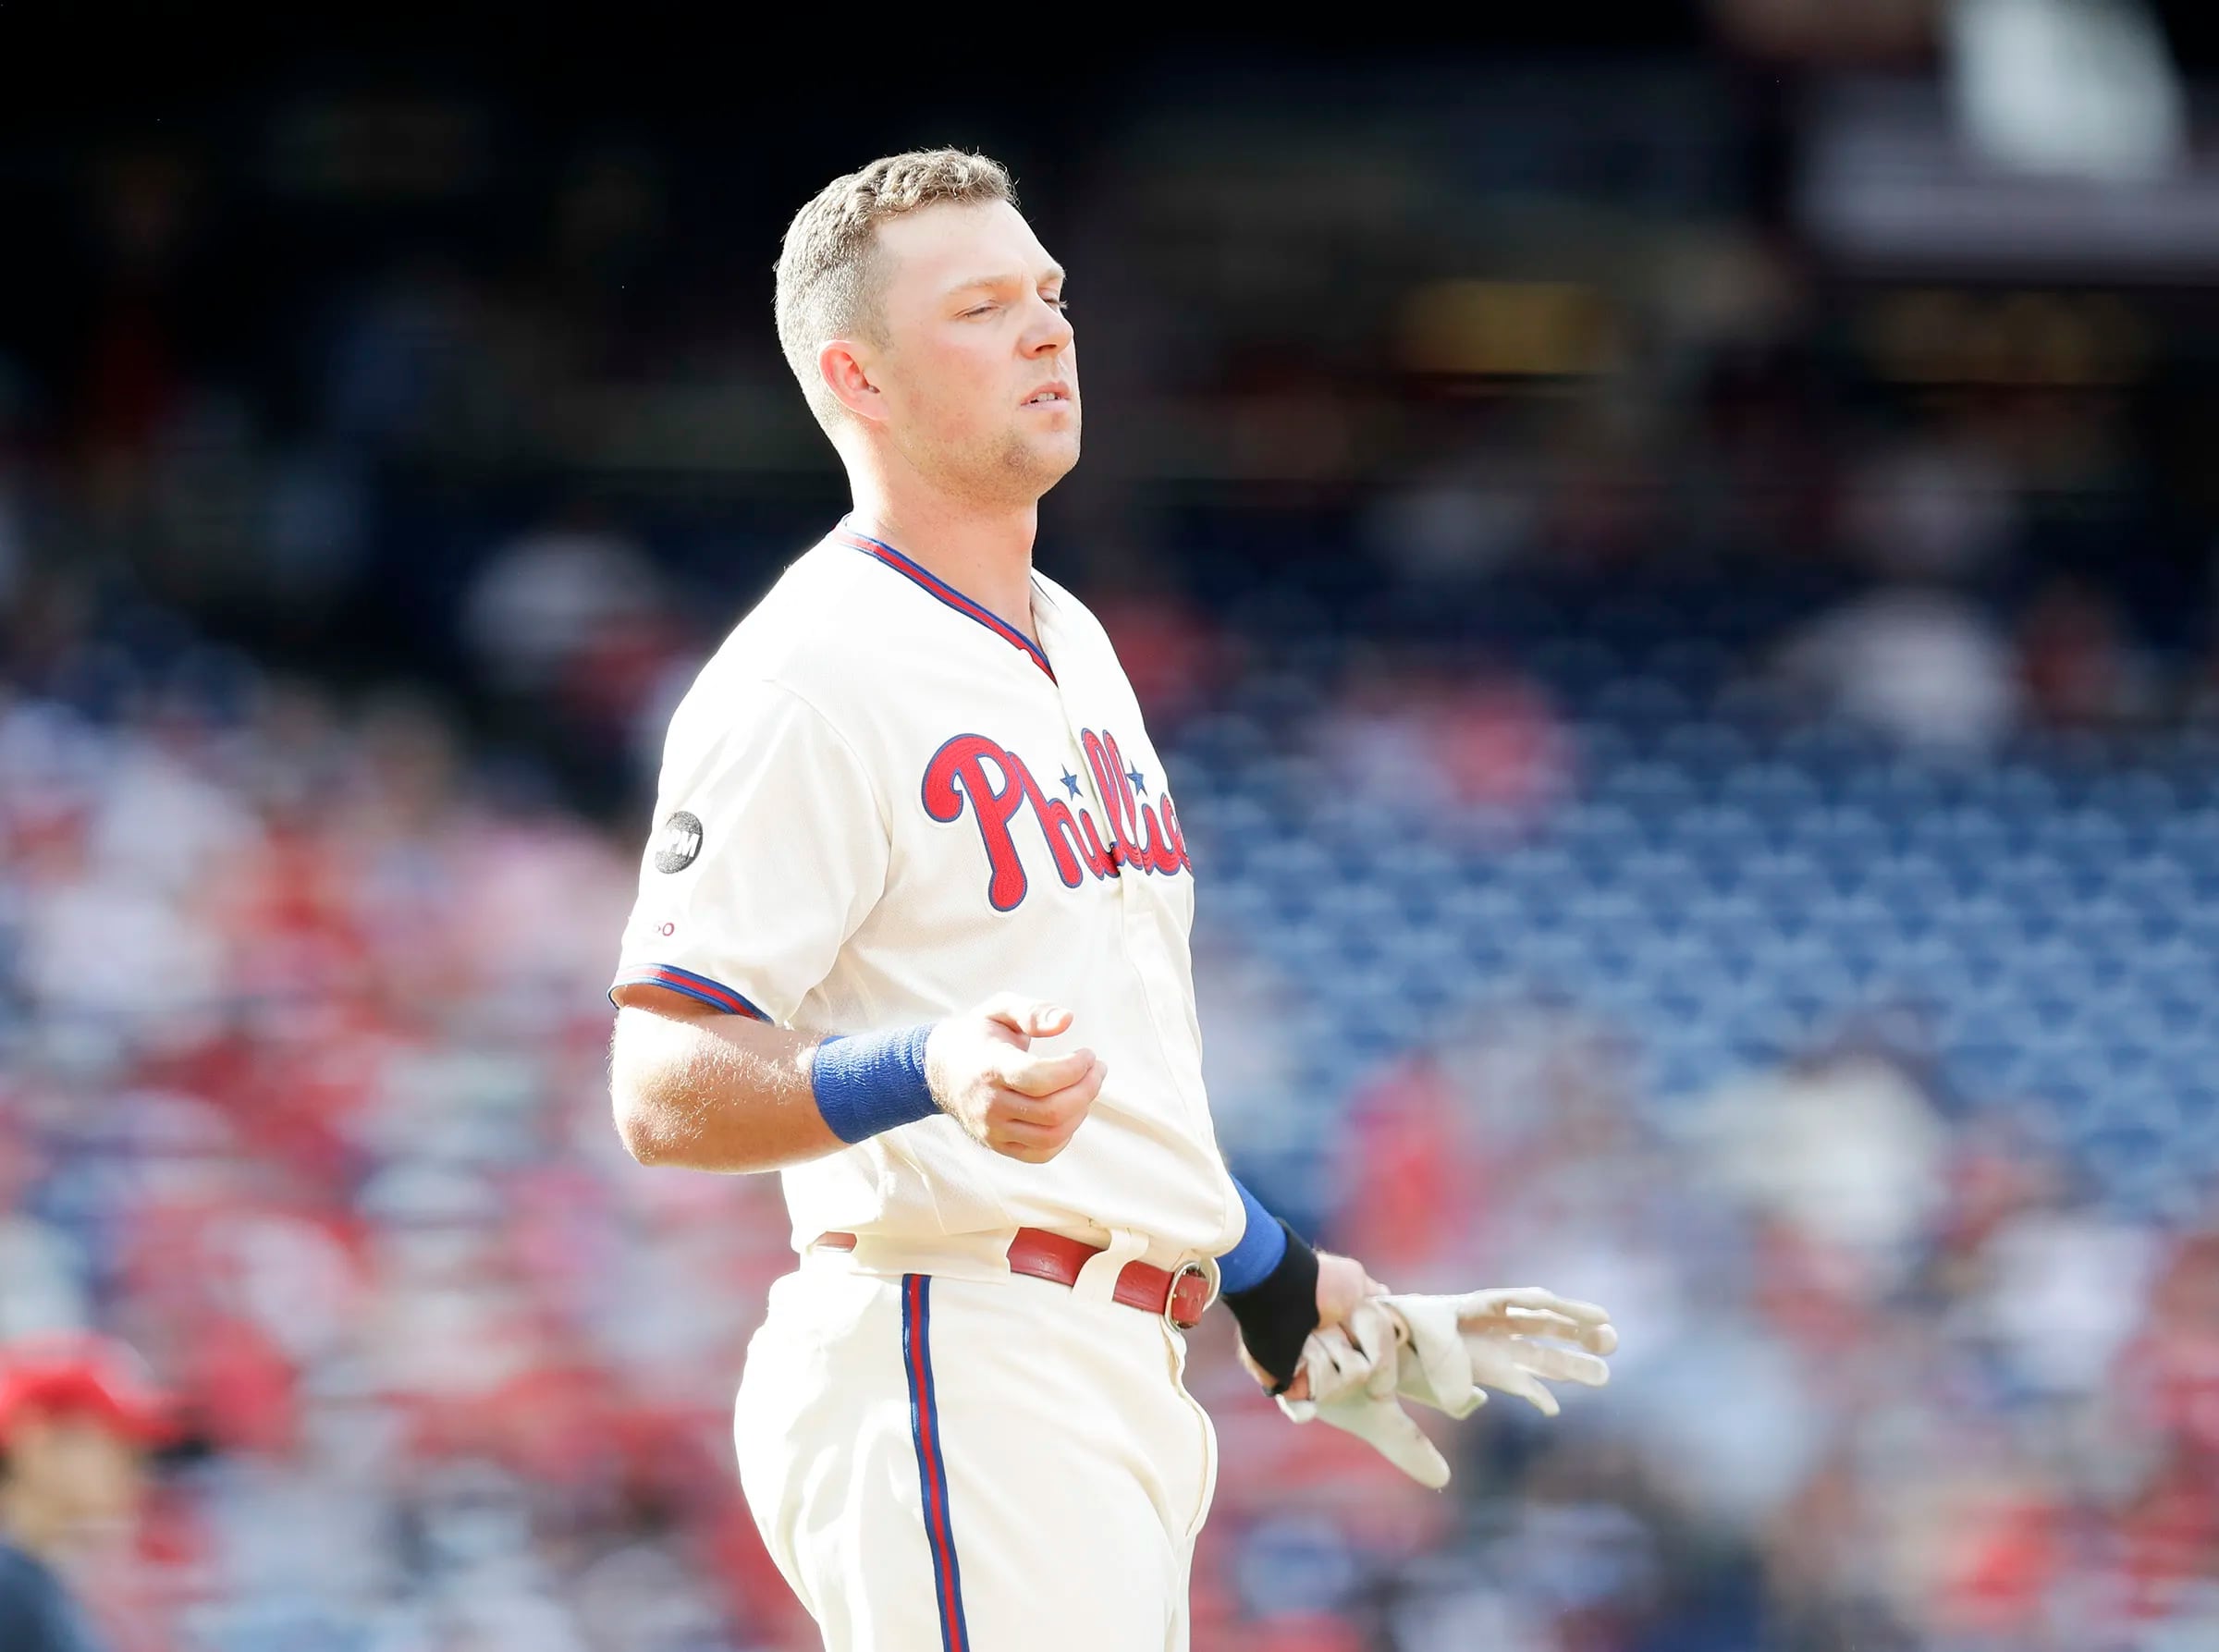 With runners on, Rhys Hoskins could wear mask at first base  Phillies  Nation - Your source for Philadelphia Phillies news, opinion, history,  rumors, events, and other fun stuff.